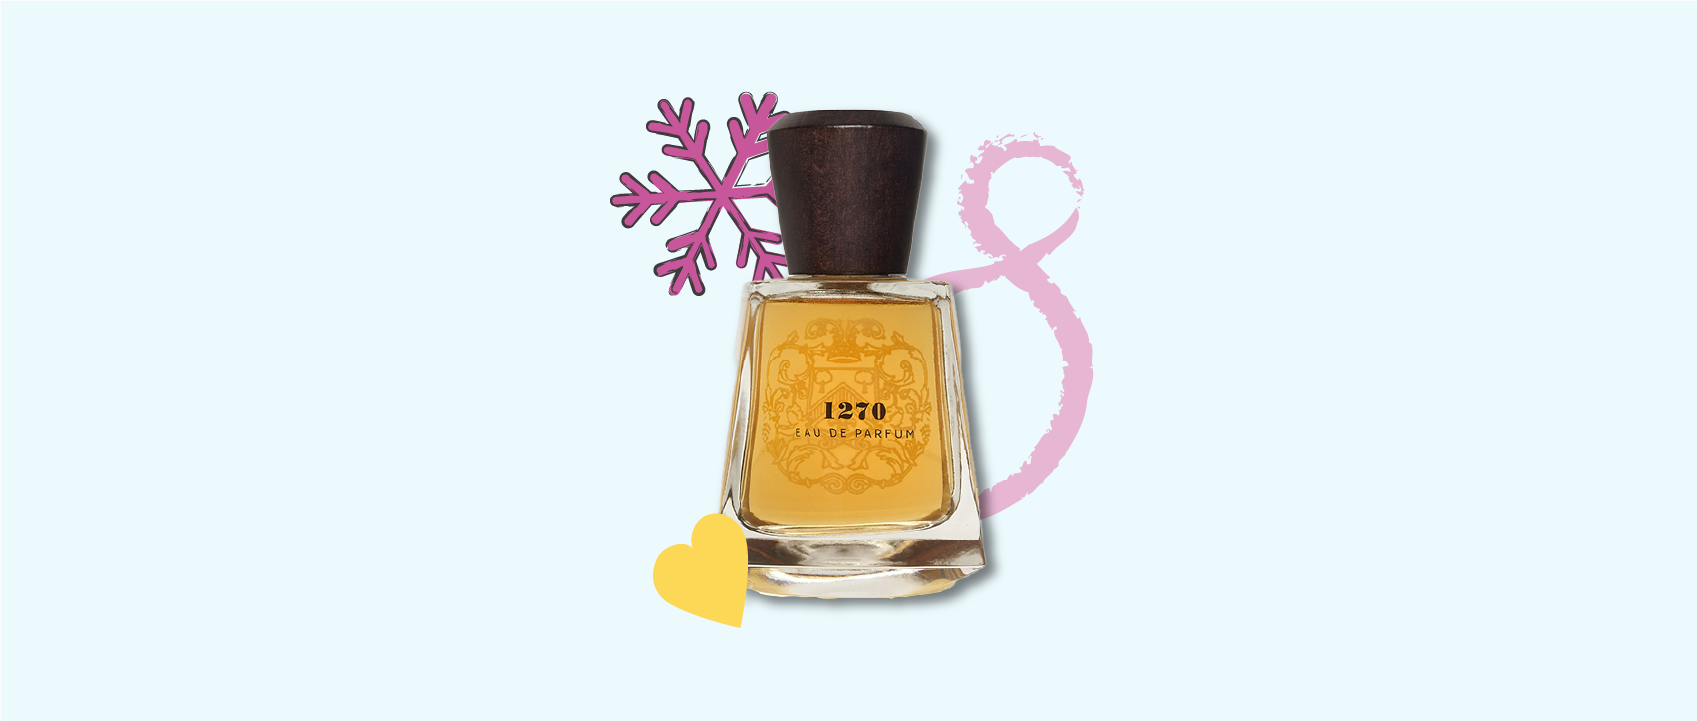 bottle of 1270 perfume by p.frapin and cie